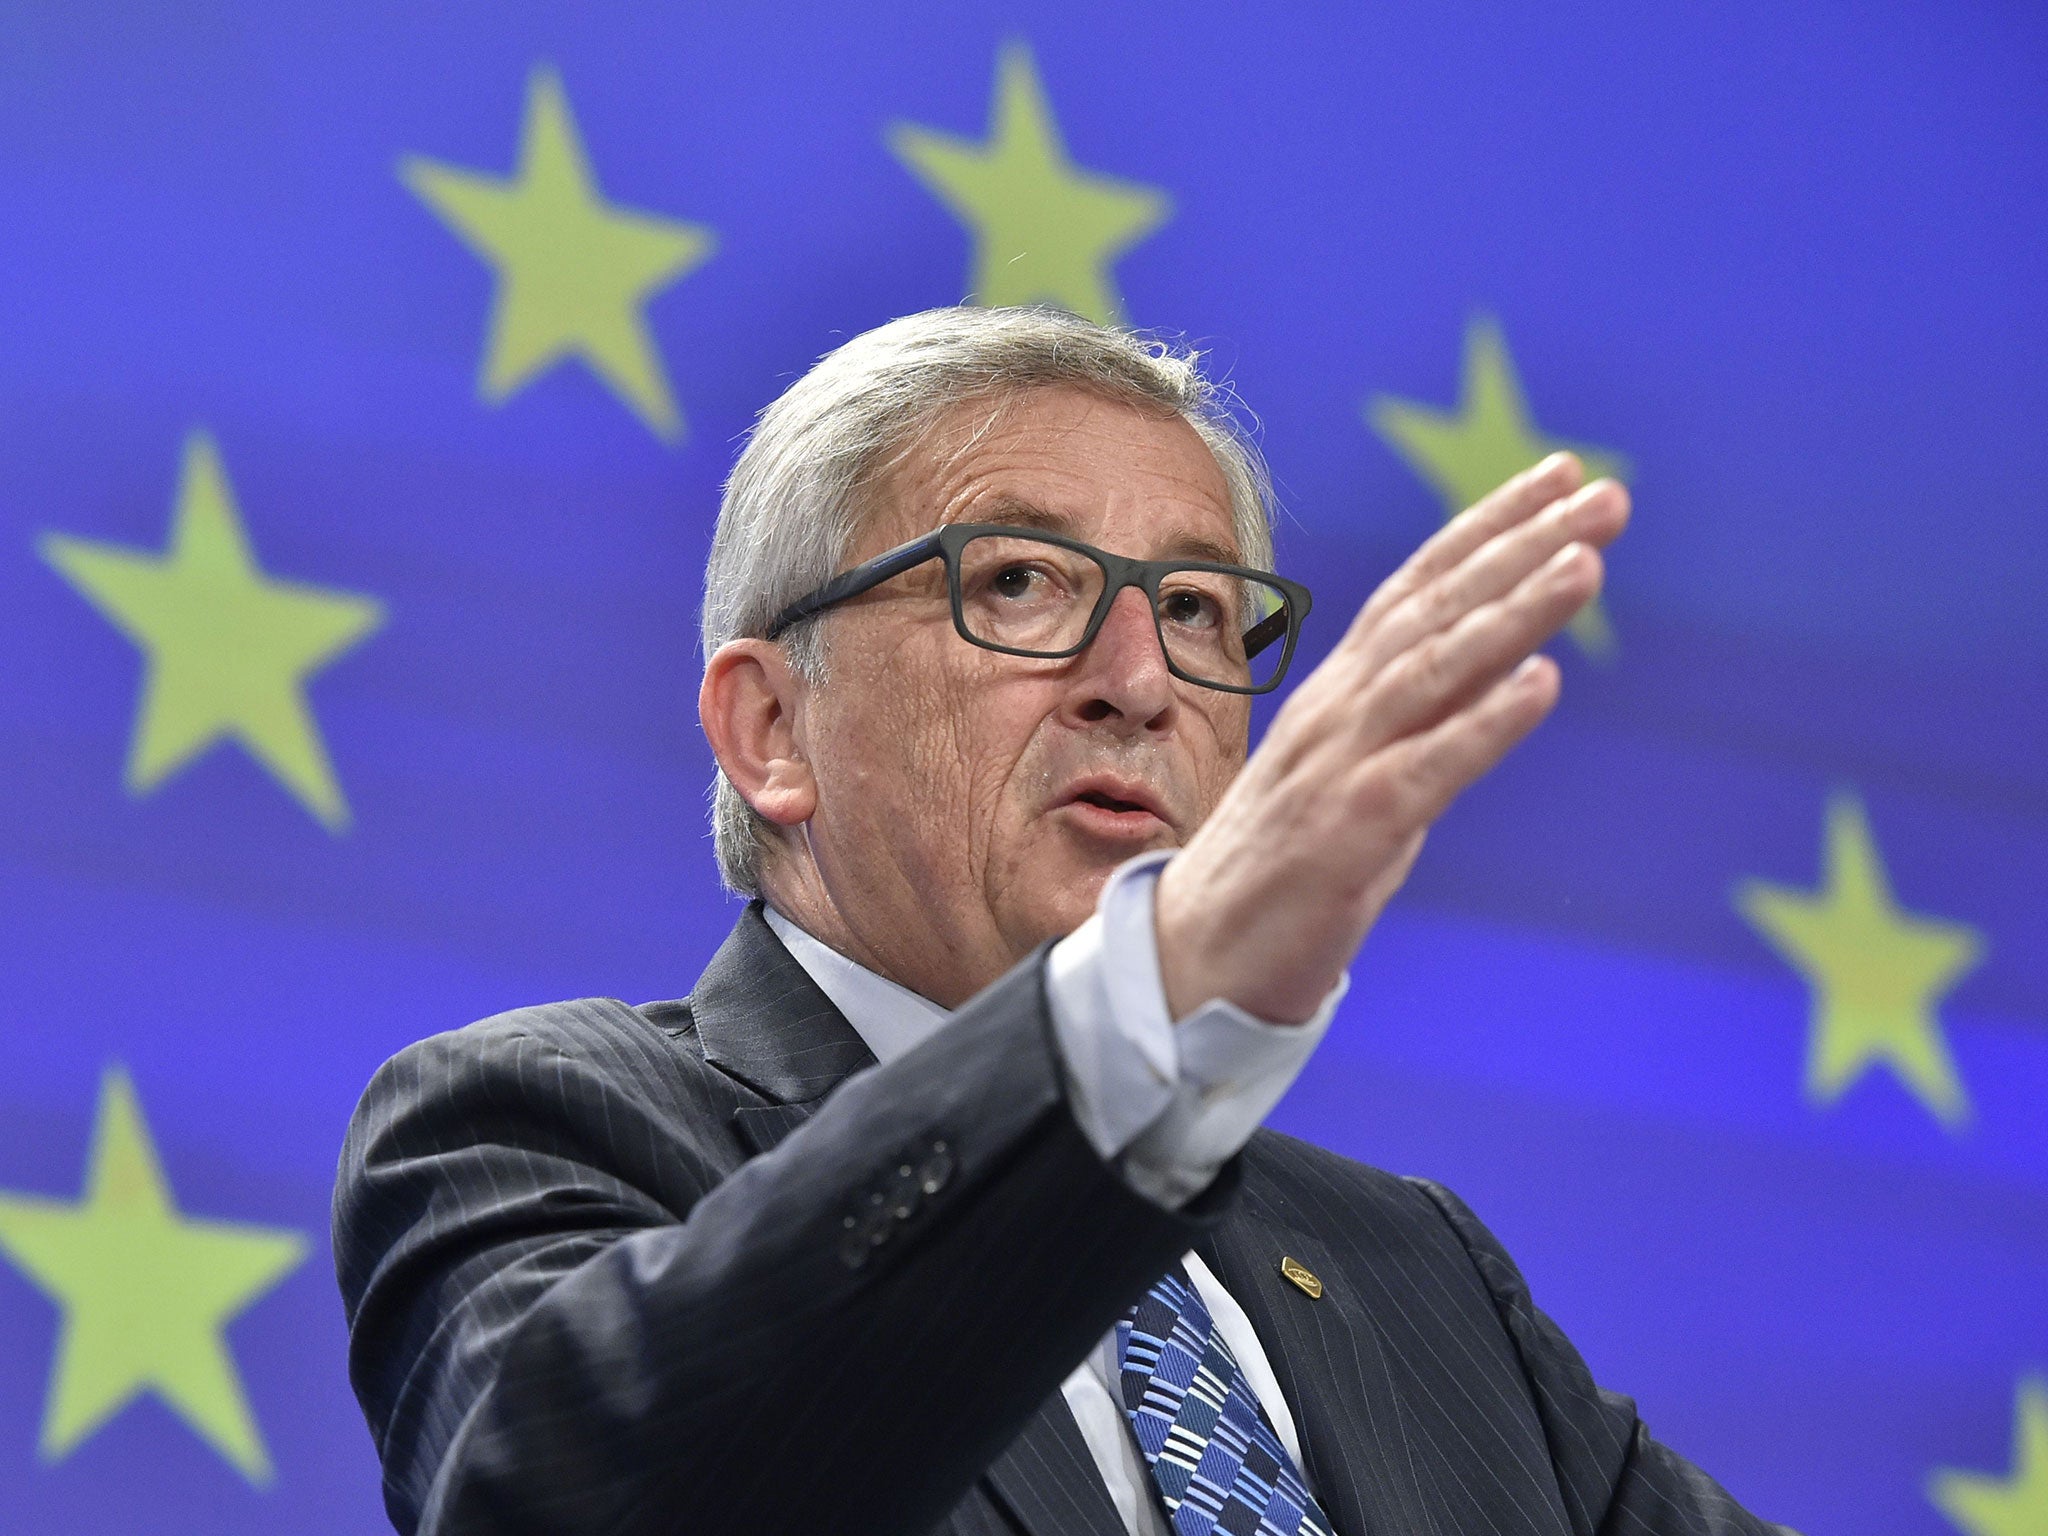 Jean-Claude Juncker appealed to Greeks to vote Yes in the referendum